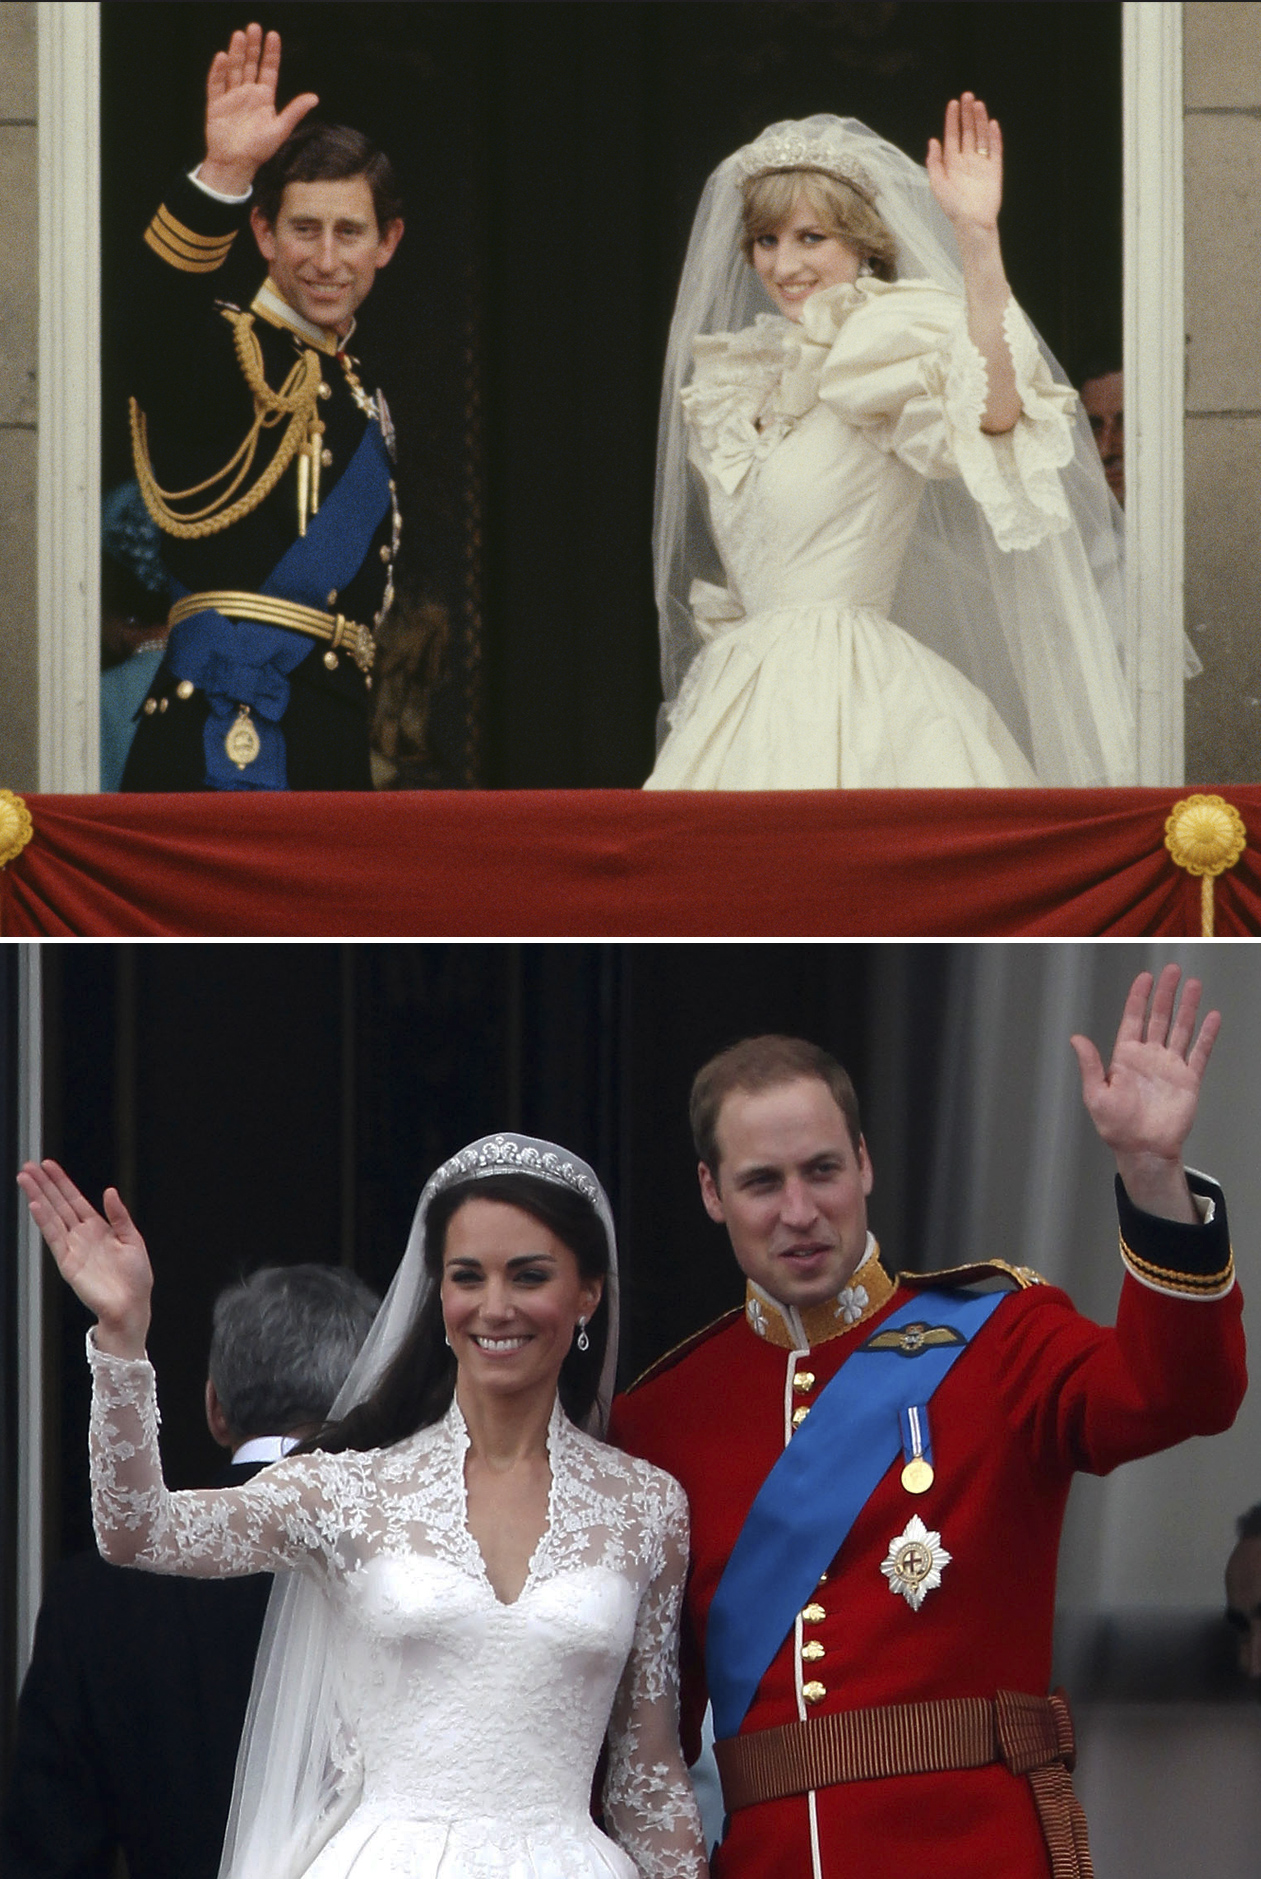 Top: Prince Charles and Princess Diana wave from the balcony of Buckingham Palace after their wedding, London, July 29, 1981. Bottom: Prince William and Catherine, Duchess of Cambridge, wave from the balcony of Buckingham Palace after their wedding, London, April 29, 2011.